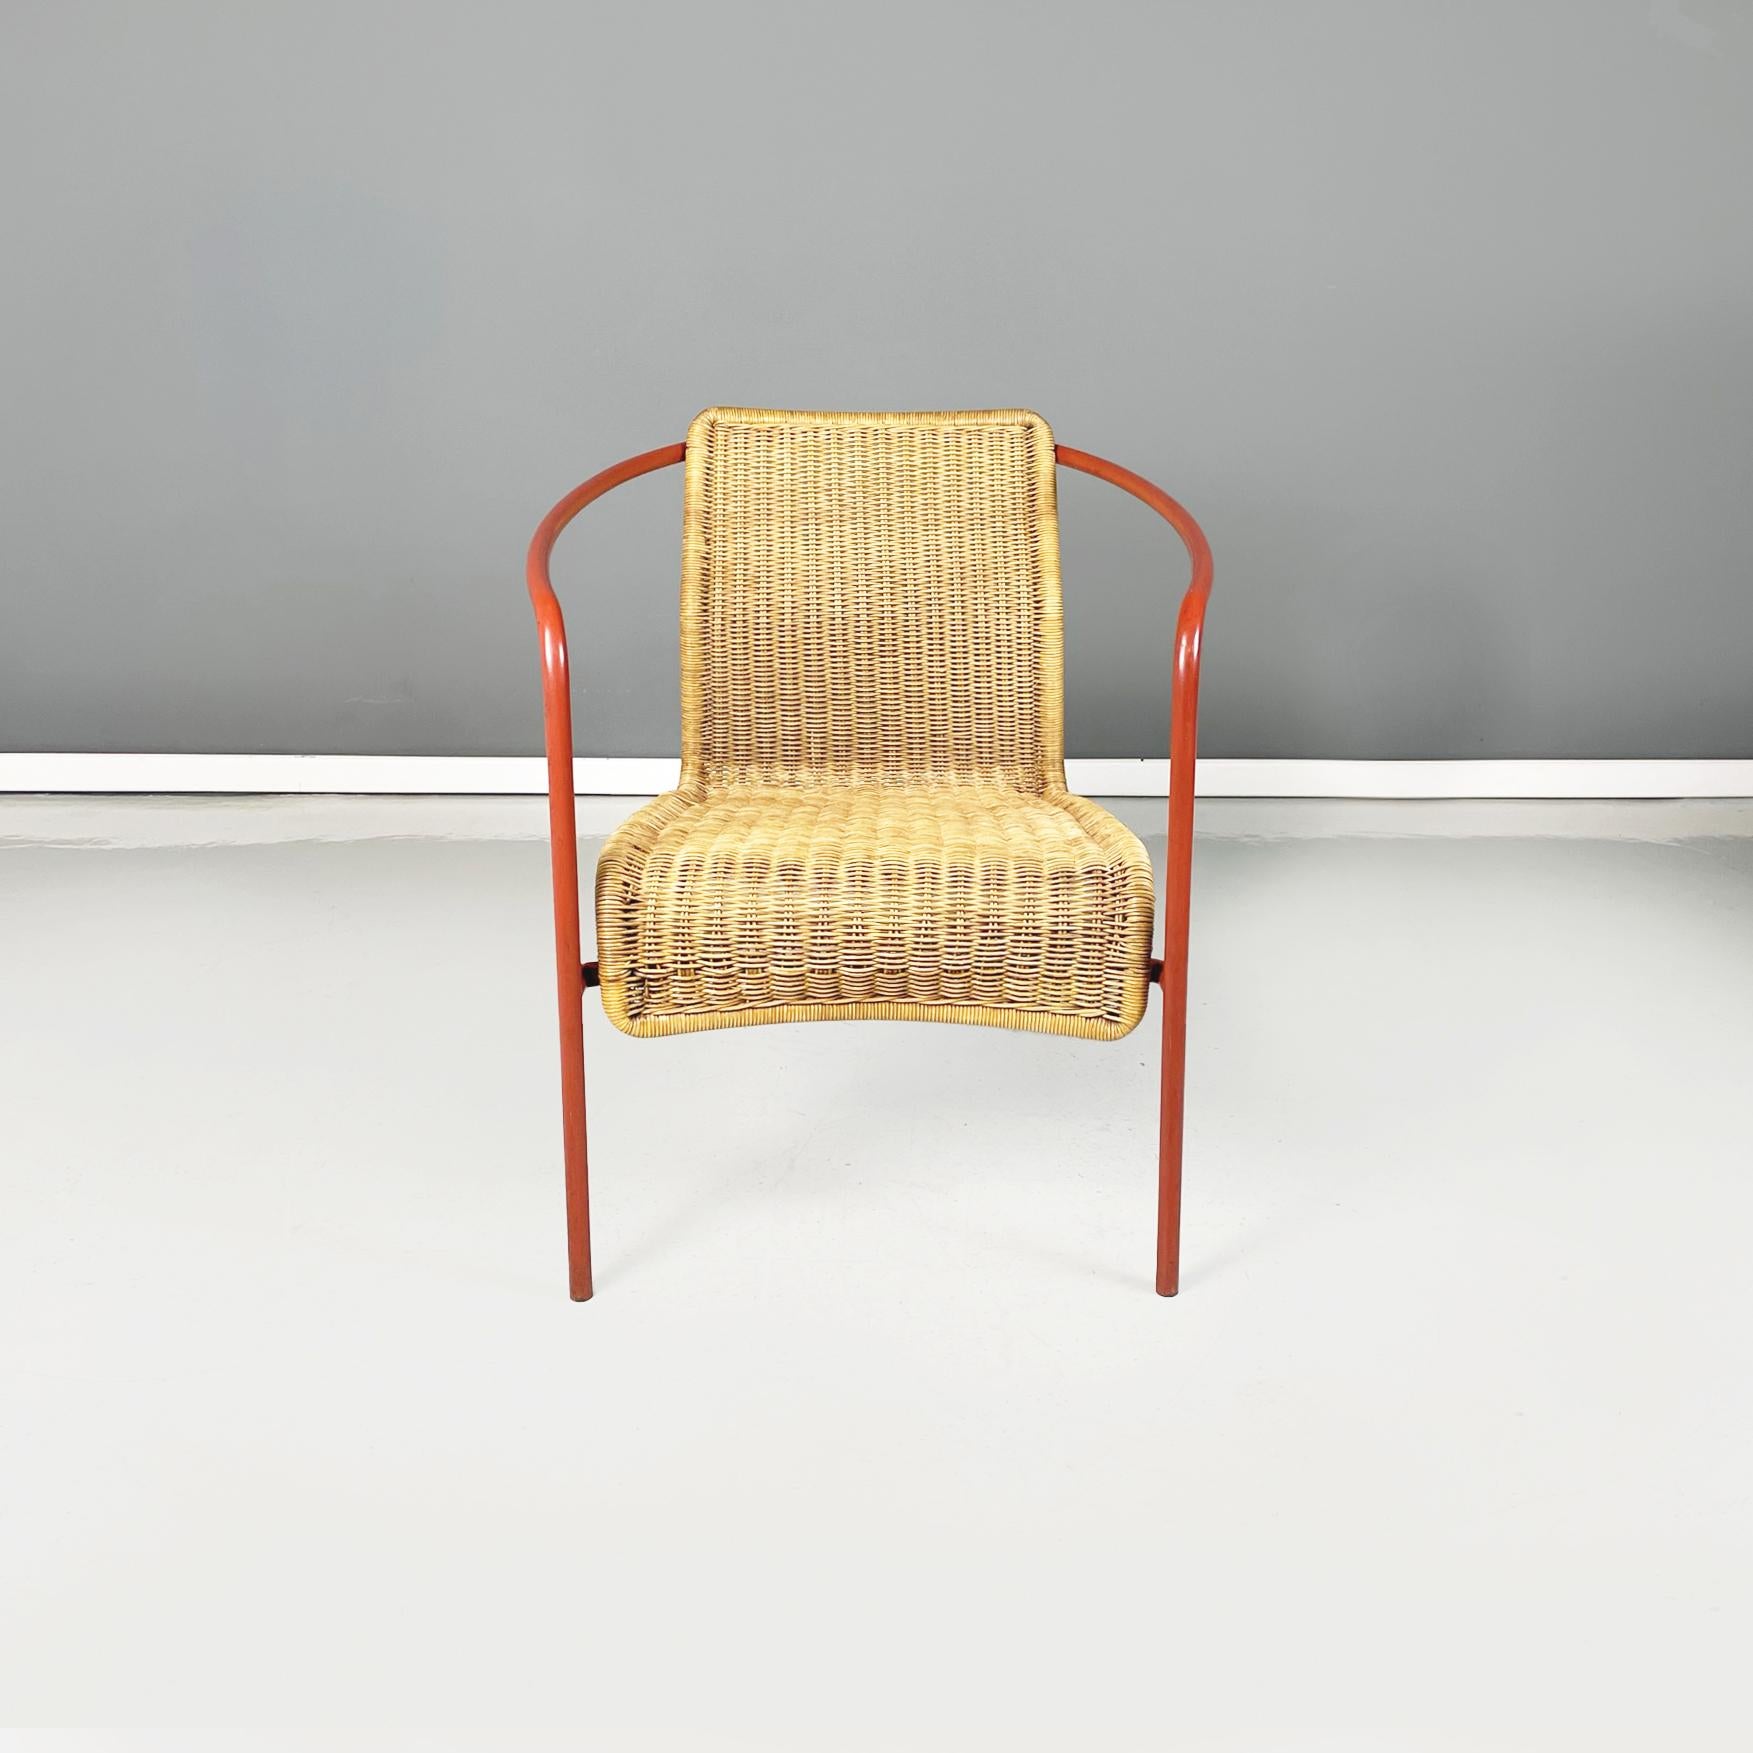 Italian modern Semi-oval outdoor armchair in rattan and orange tubular metal, 1980s
Semi-oval armchair in wicker and metal. The backrest and the long seat are in woven rattan. The structure is in orange painted tubular metal. Perfect for use on the